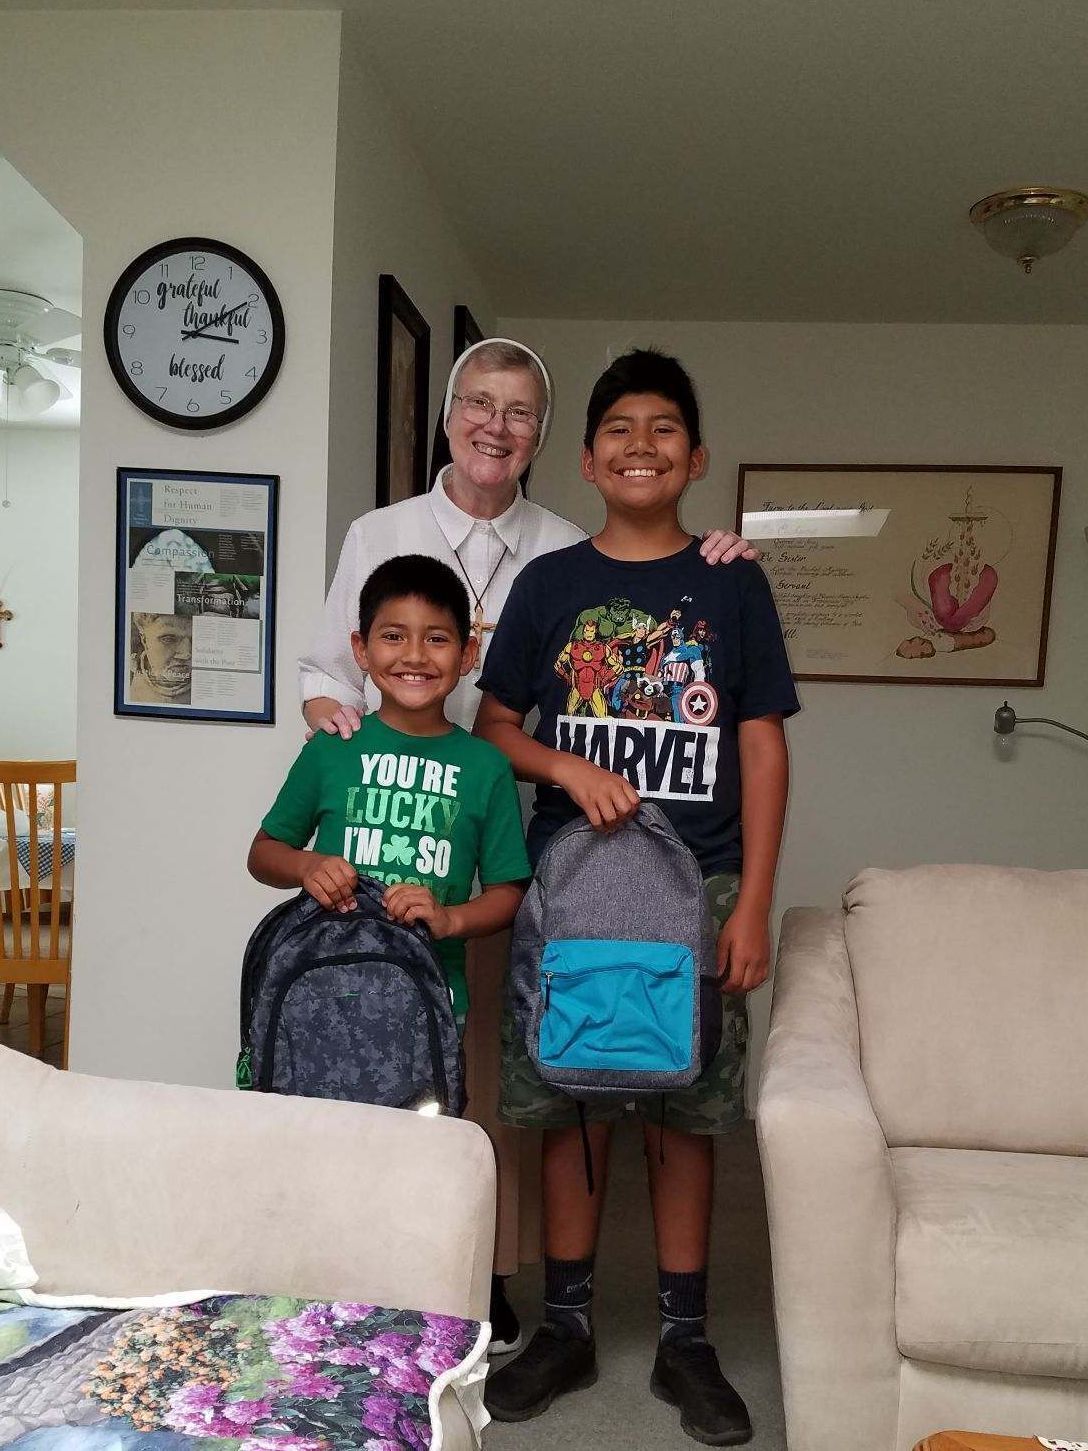 Sister stands behind two school aged children holding backpacks